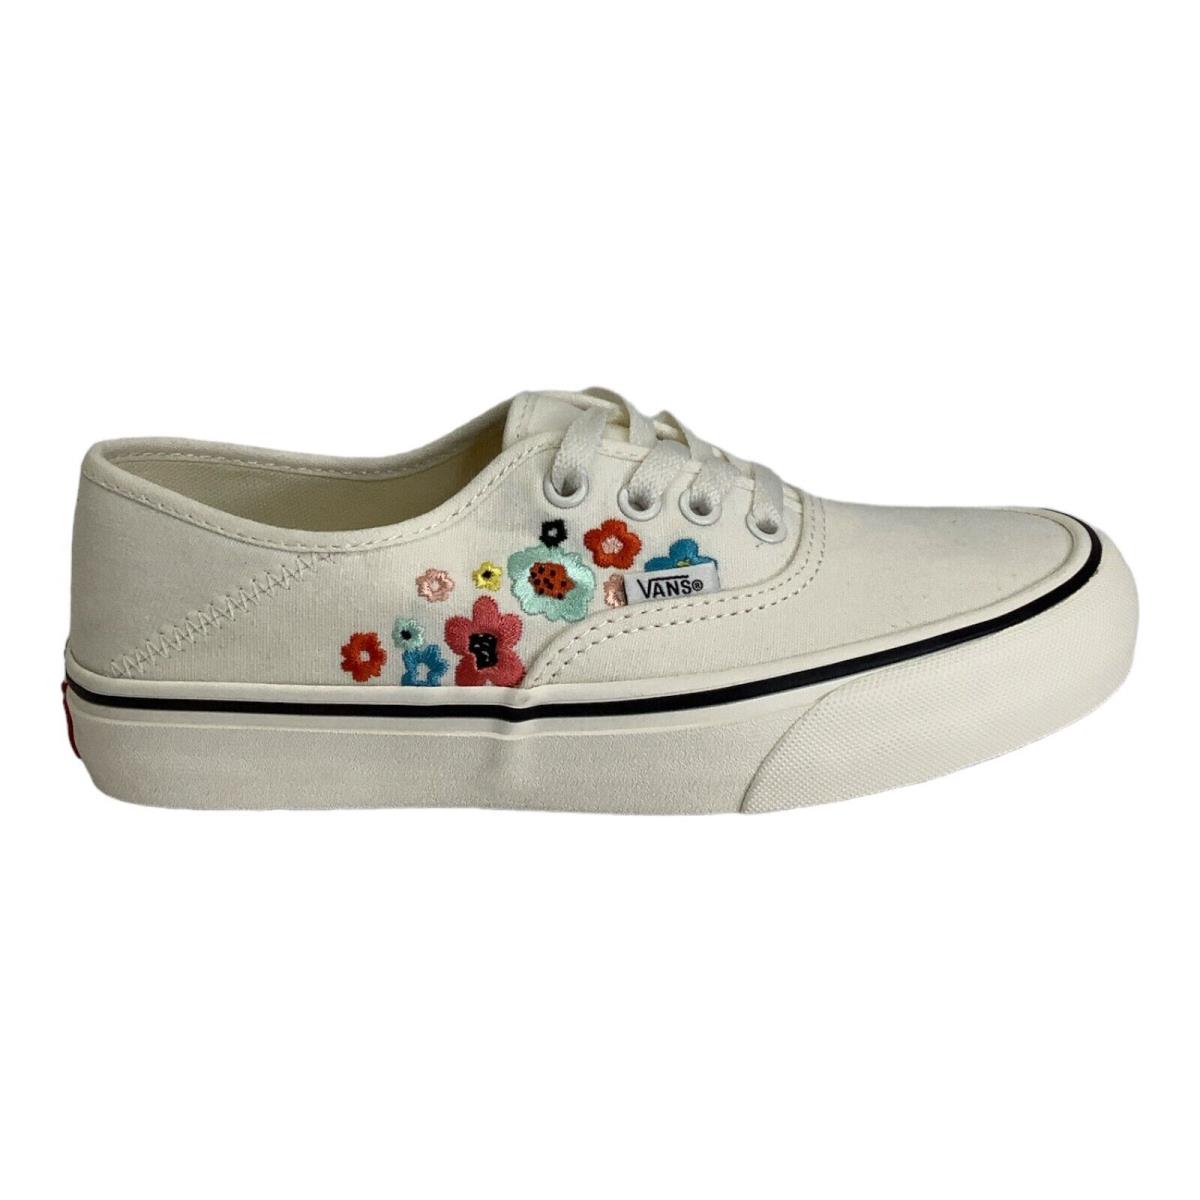 Vans Authentic Vr3 Vr3 Skating Groovy Floral Marshmallow M 8.5 W 10 EU 41